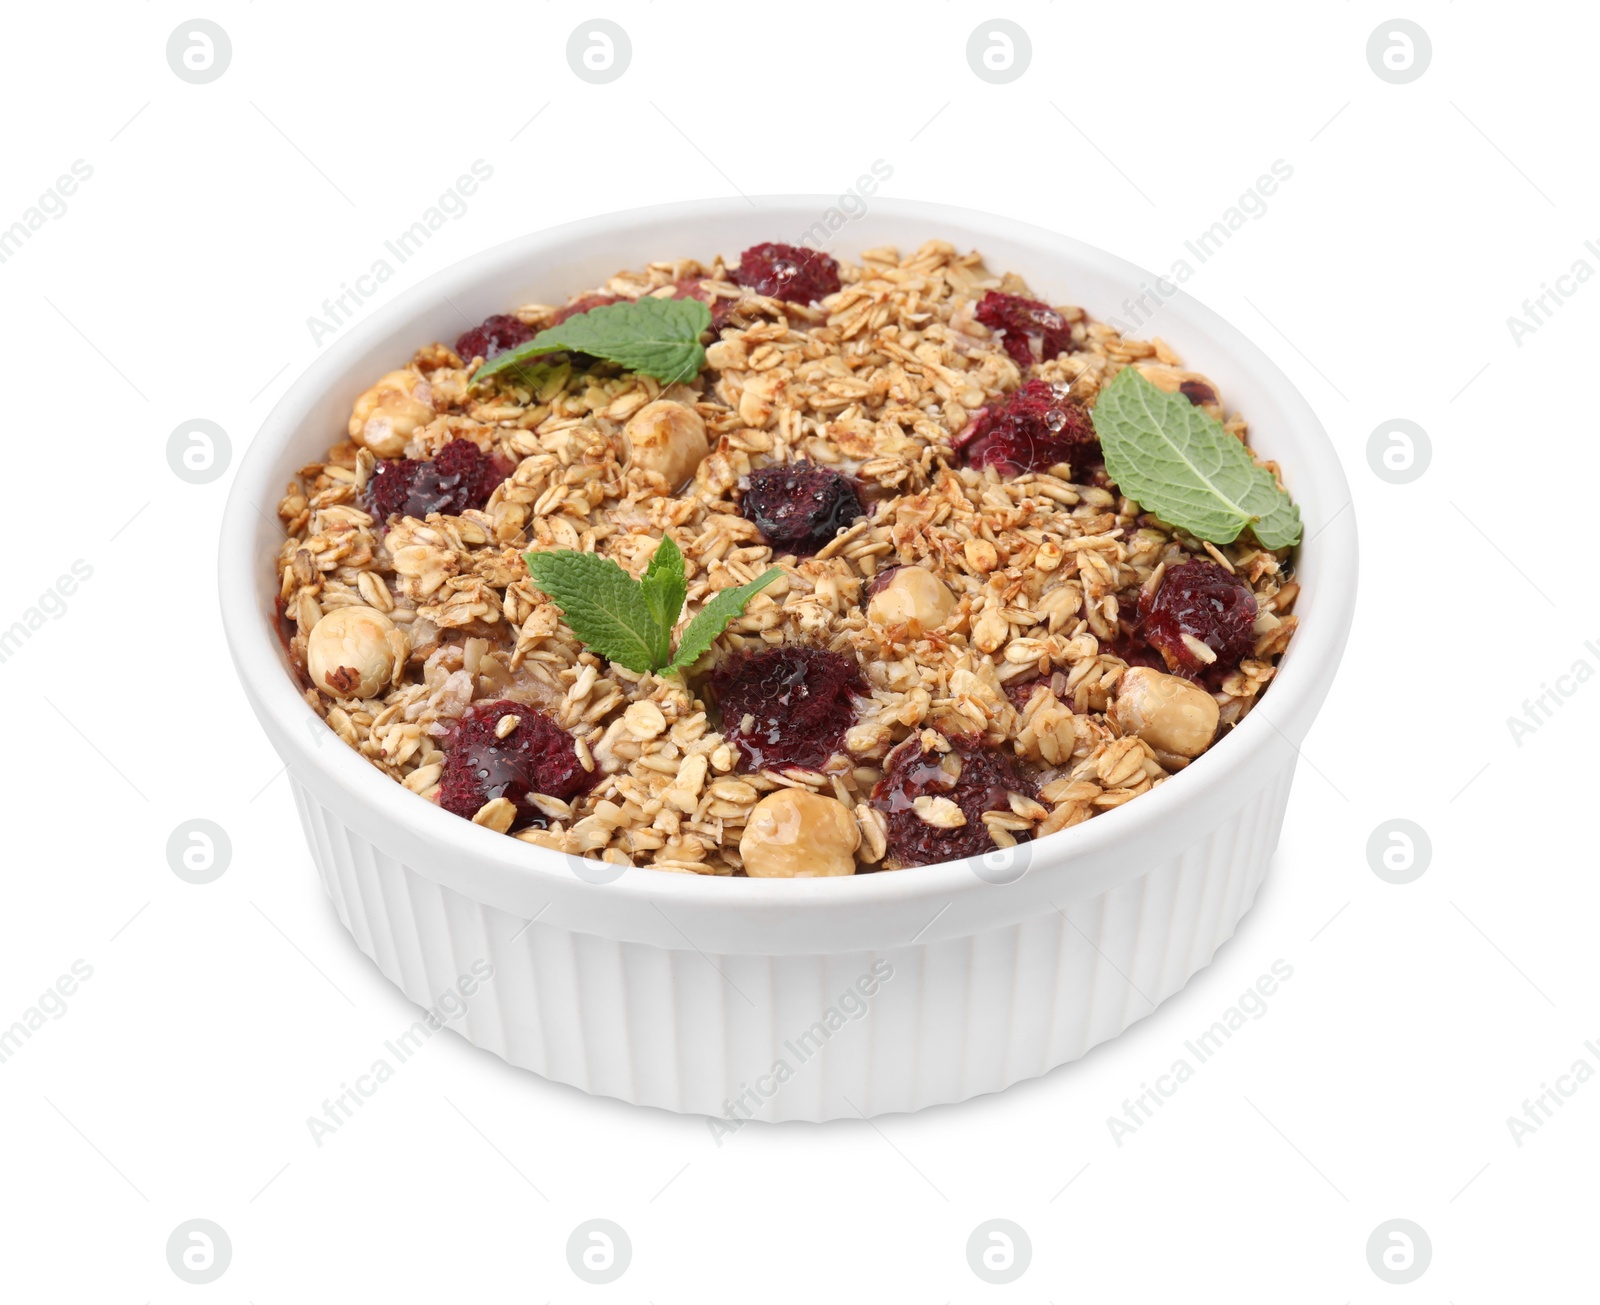 Photo of Tasty baked oatmeal with berries and nuts in bowl isolated on white